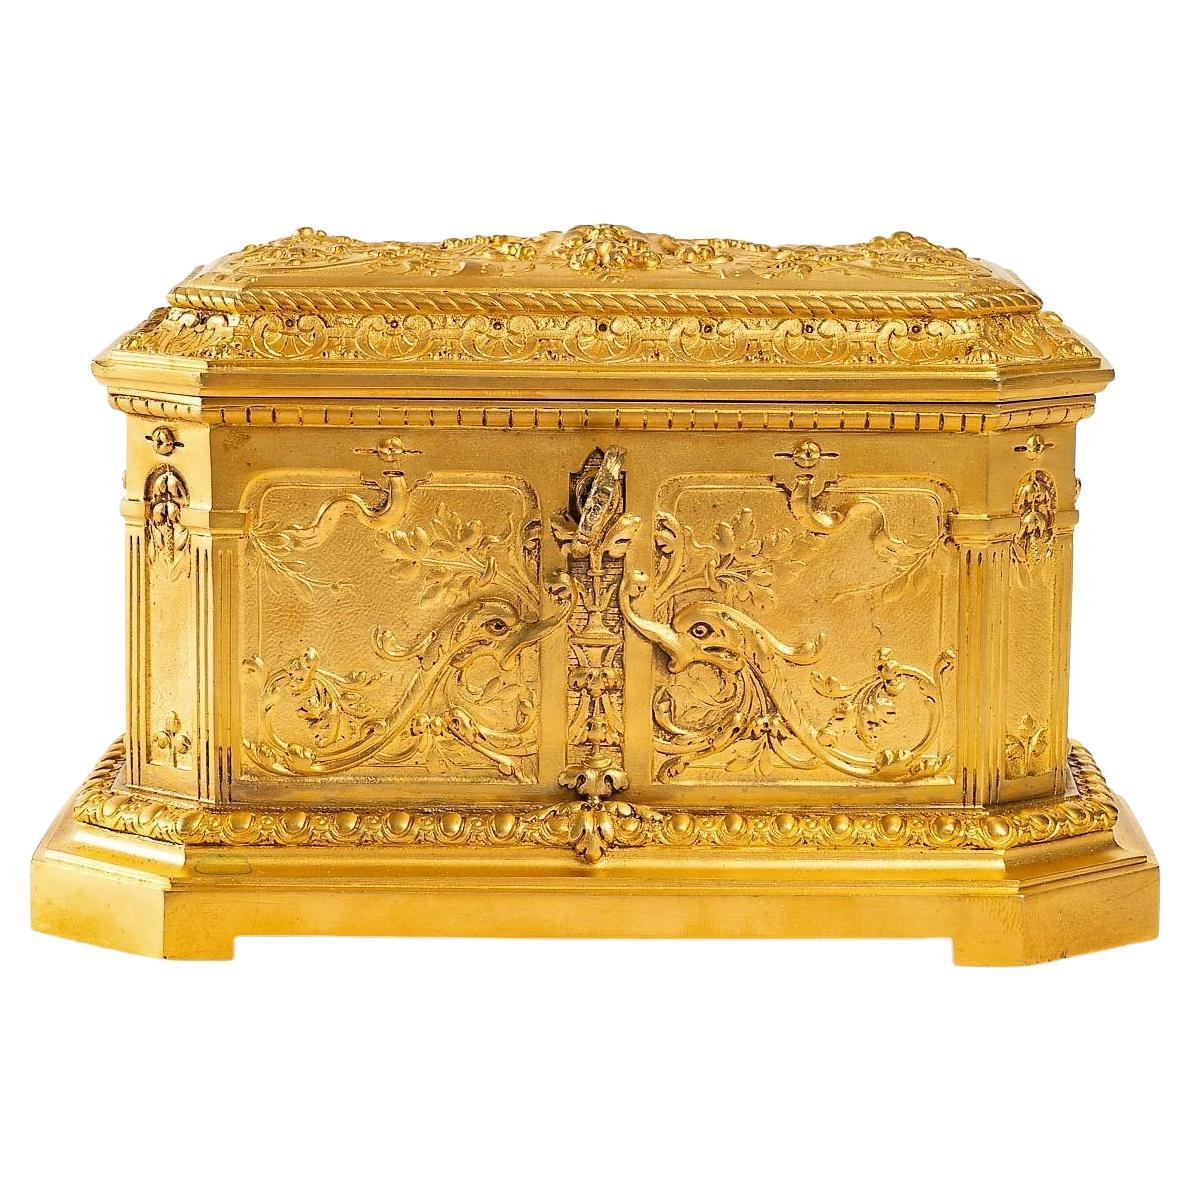 Gilded bronze jewelry box by Paul Louchet.

Beautiful gilded bronze jewelry box by Paul Louchet from the beginning of the 20th Century in Louis XIV style.

Dimensions: W: 18 cm, H: 11cm, D: 11cm

Ref: 3322